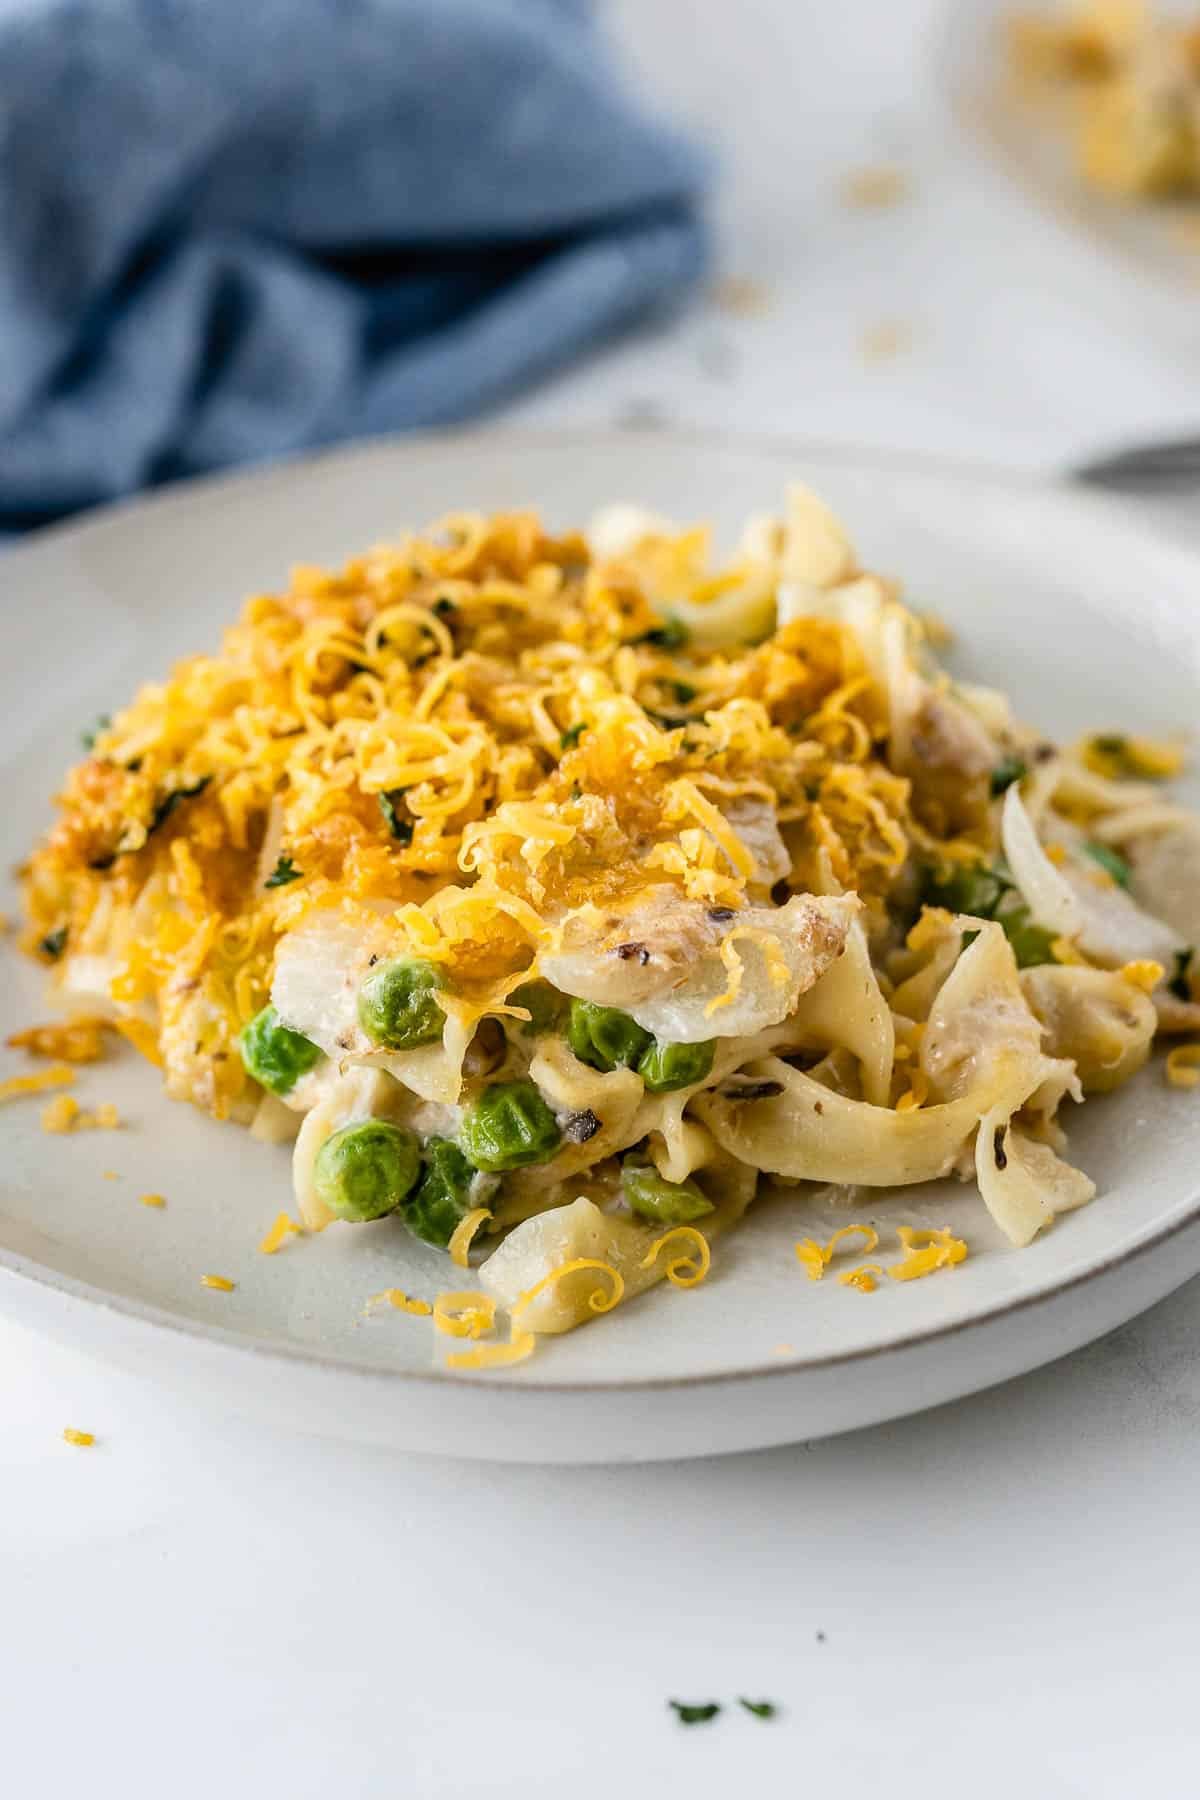 white plate with tuna casserole with egg noodles, peas and a crunchy topping.